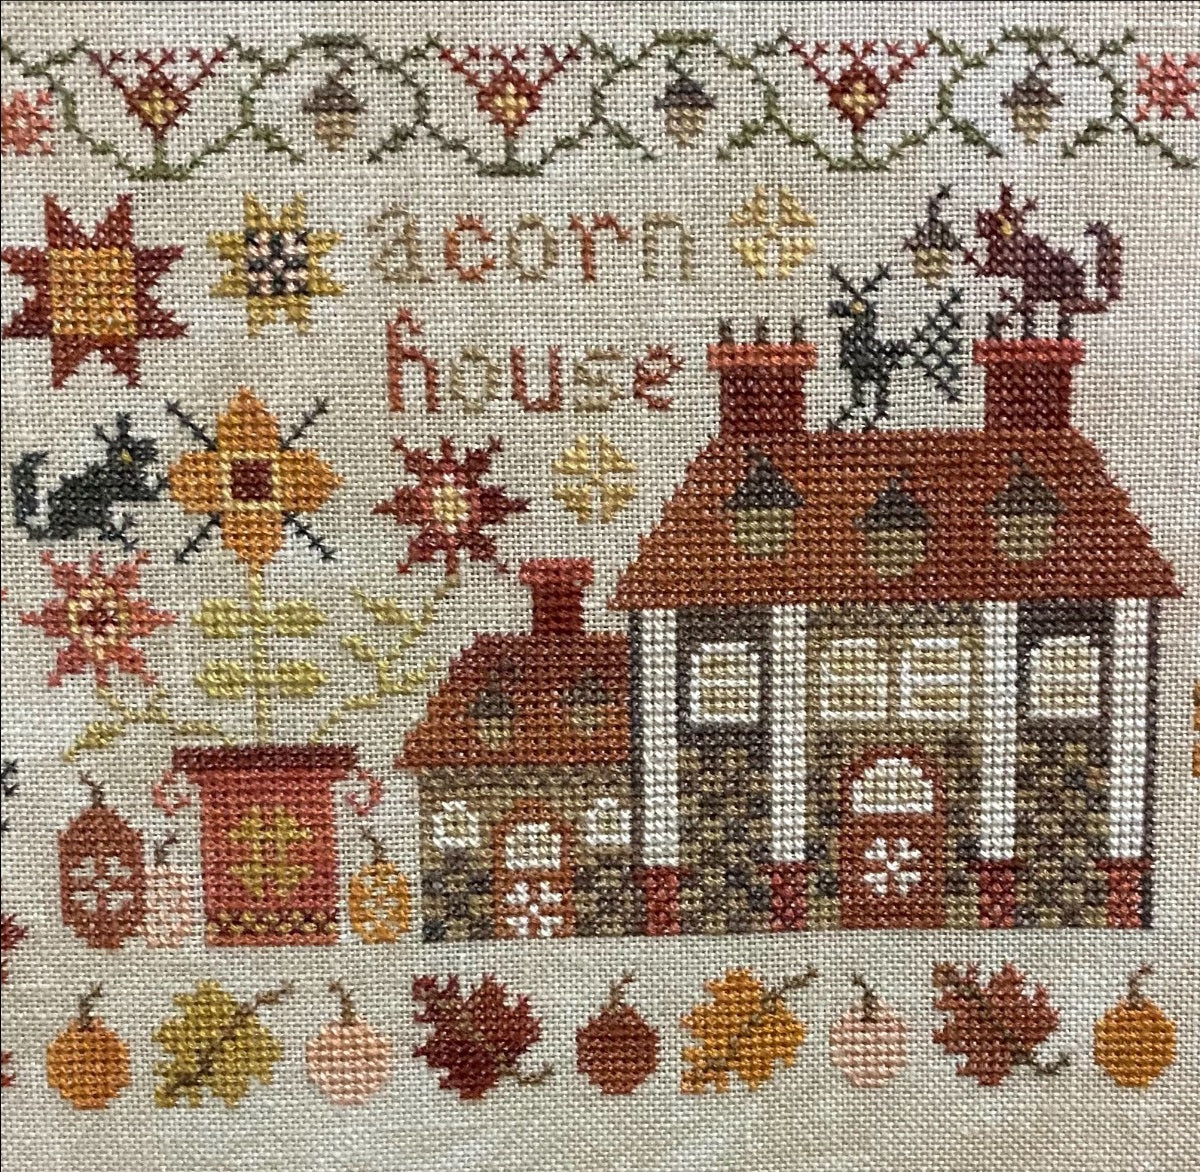 Acorn House - The Houses on Pumpkin Lane #8 - Pansy Patch Quilts and Stitchery, Needlecraft Patterns, The Crafty Grimalkin - A Cross Stitch Store